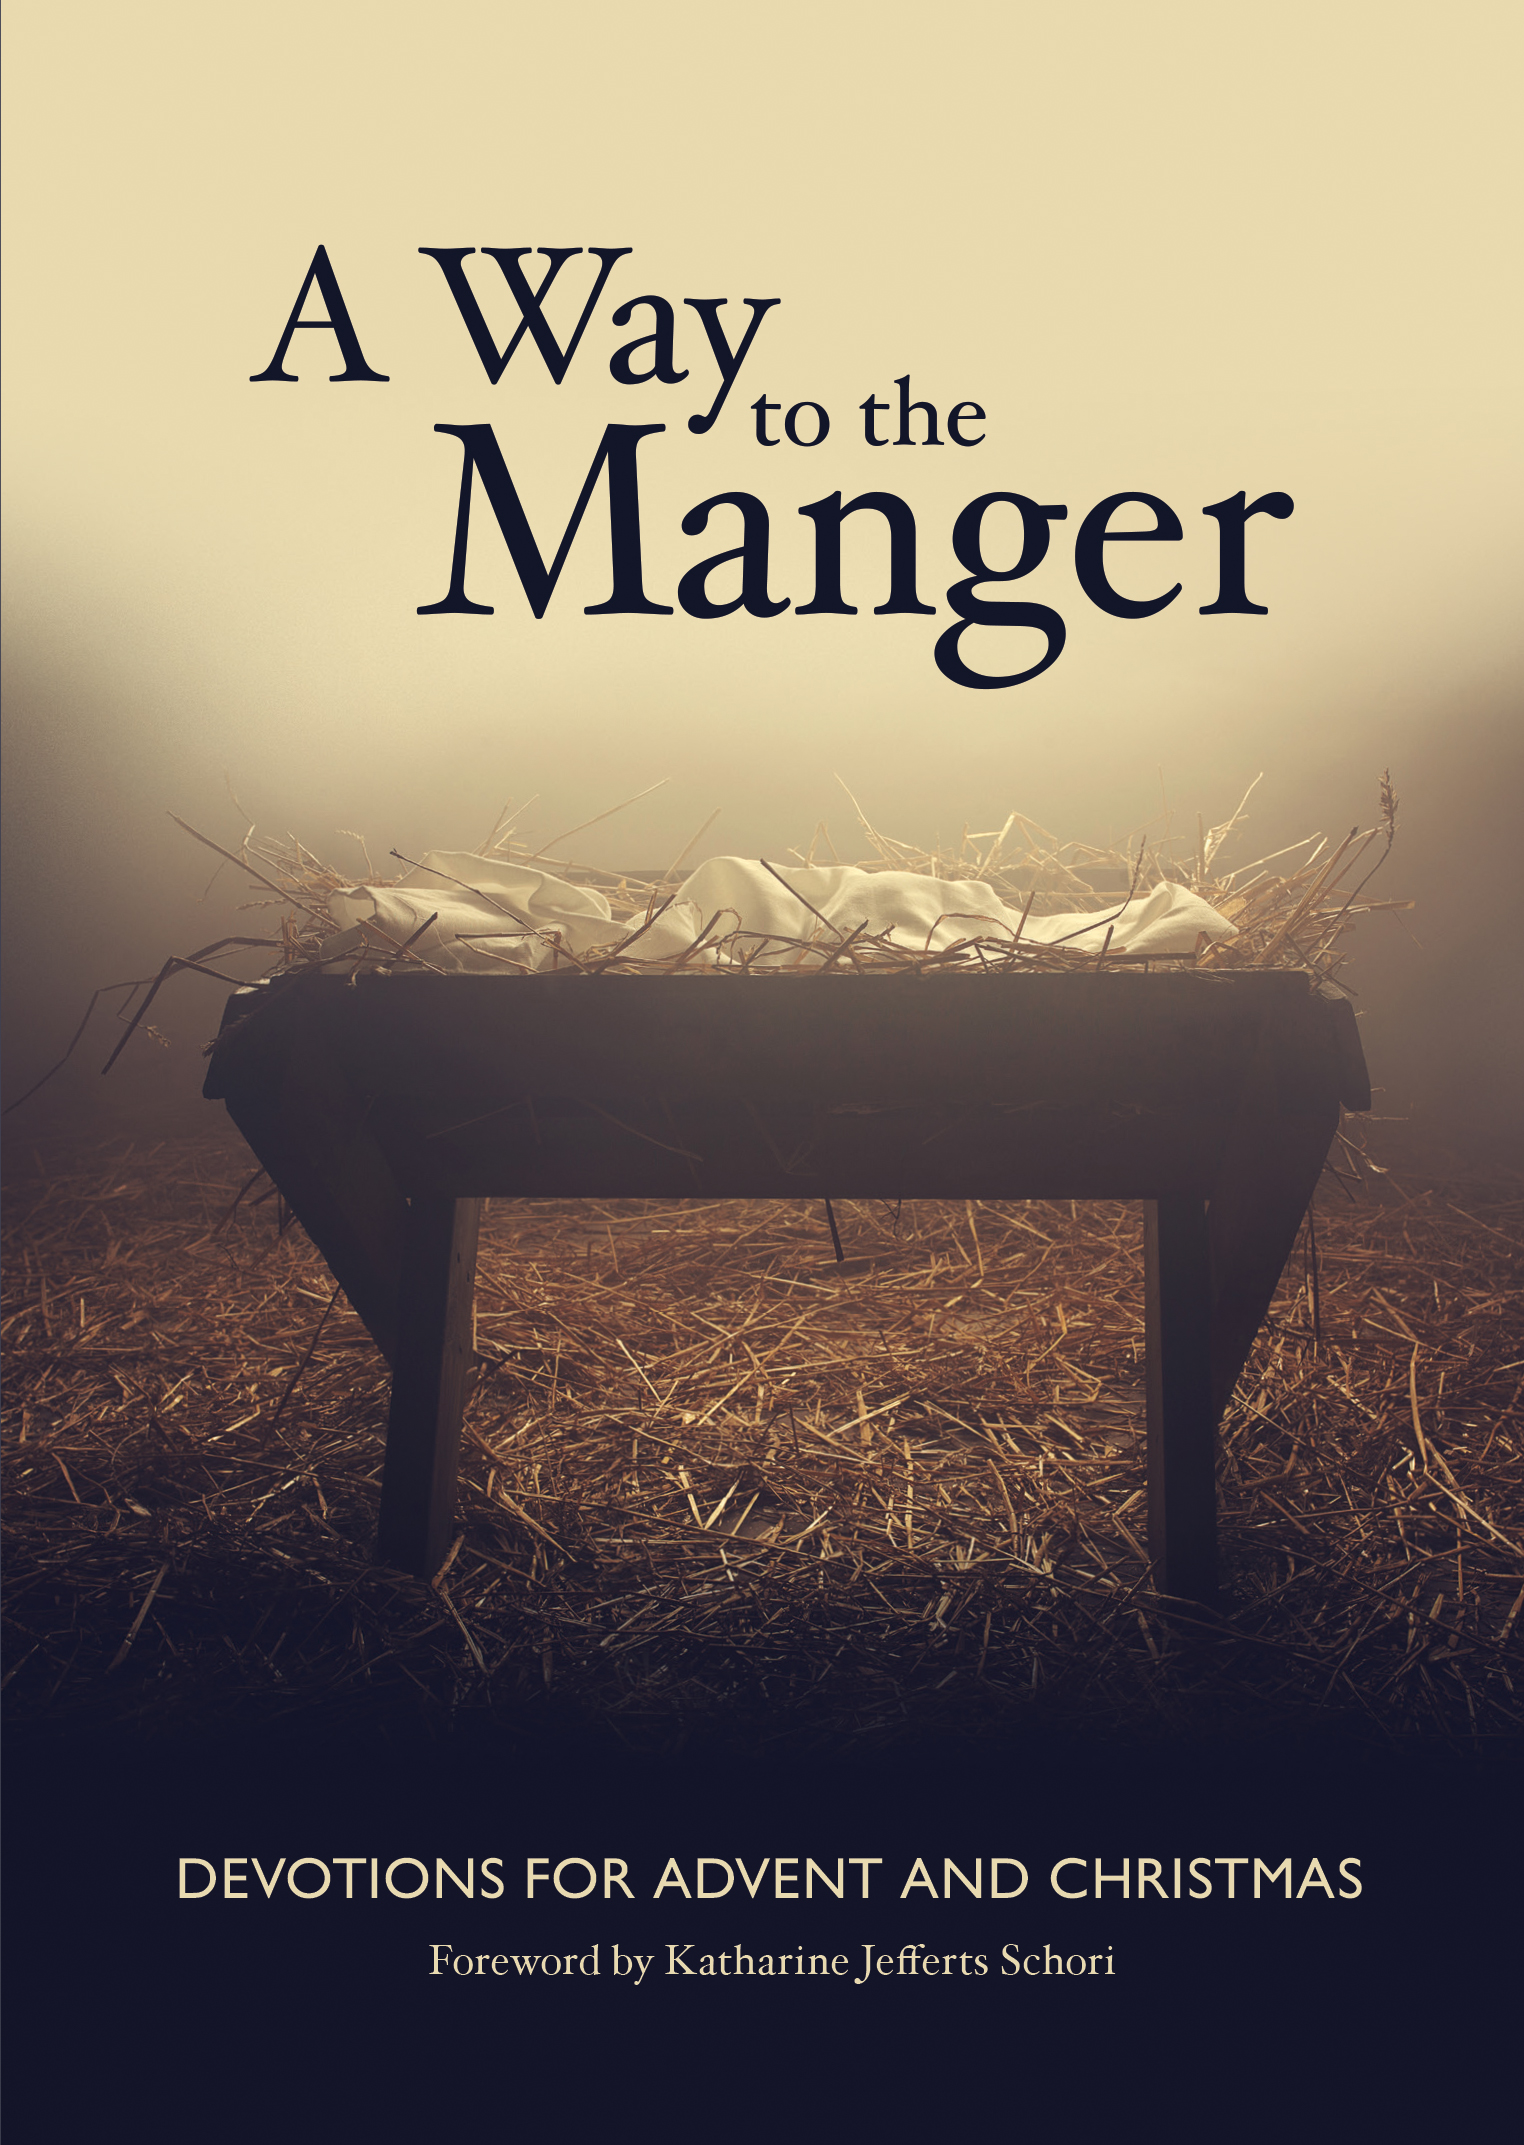 A Way to the Manger